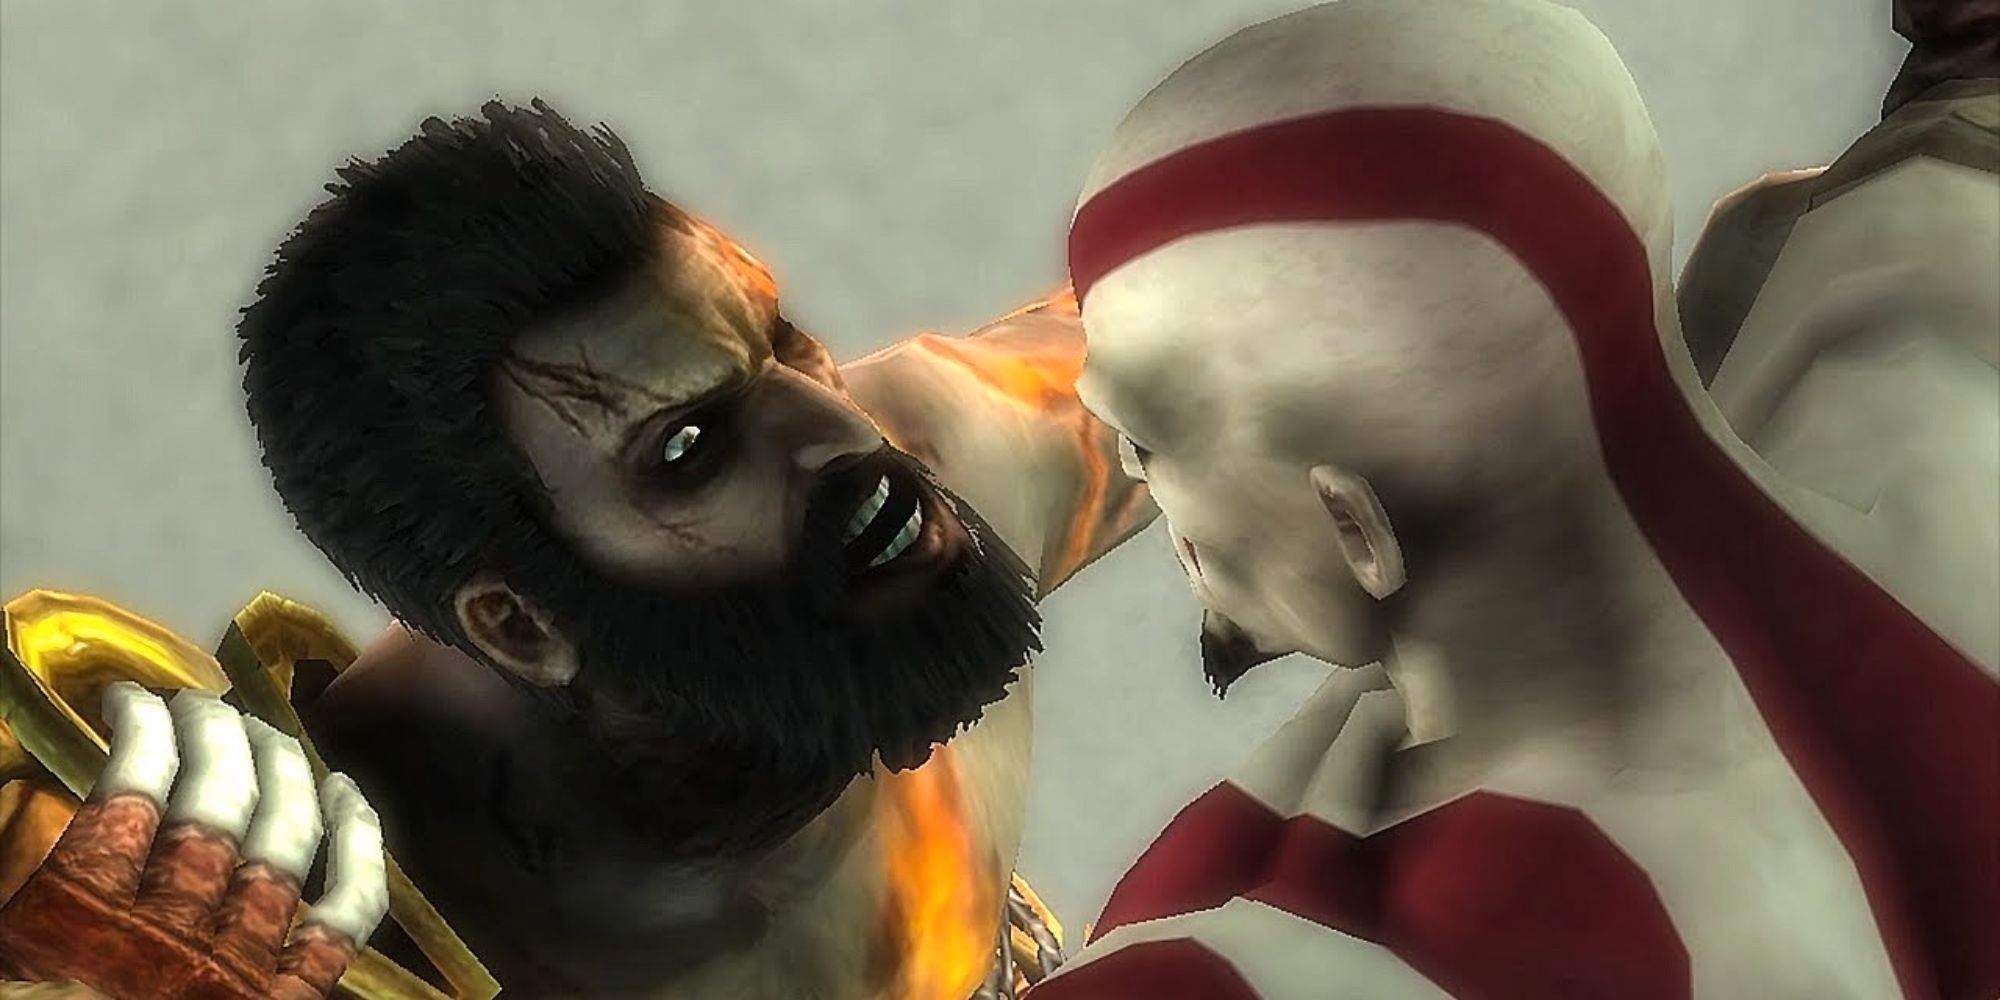 Deimos eventually blamed Kratos for not saving him in God of War, and was tortured into hating his brother